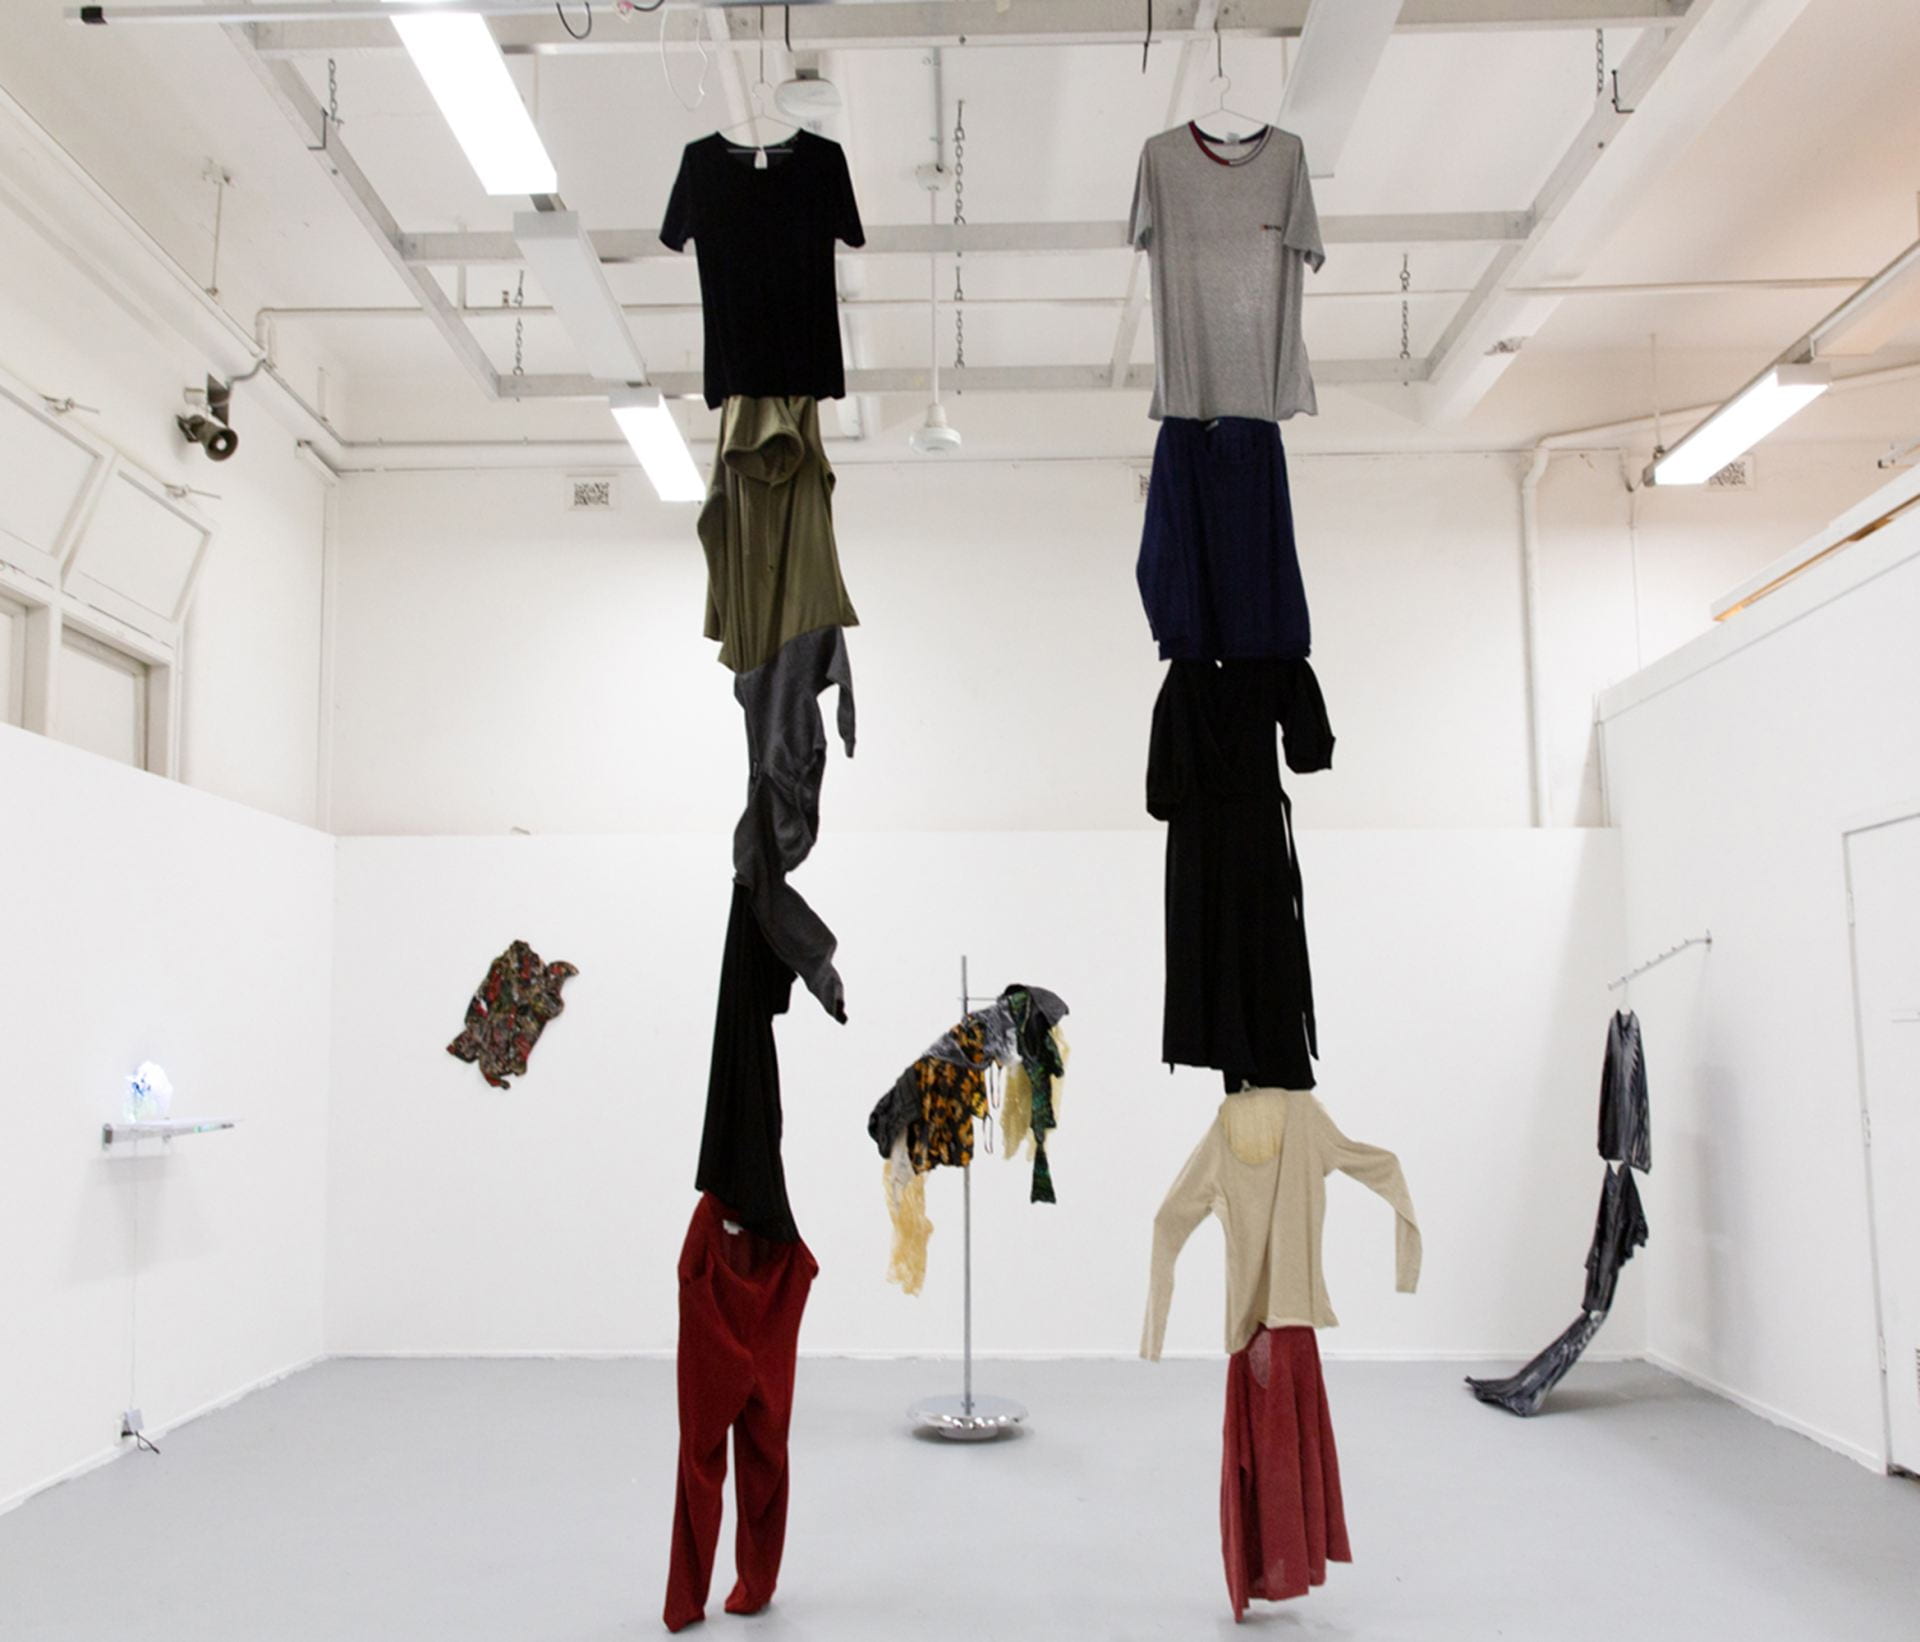 a line of clothing is hung from the ceiling, resin clothing artworks can be seen in background